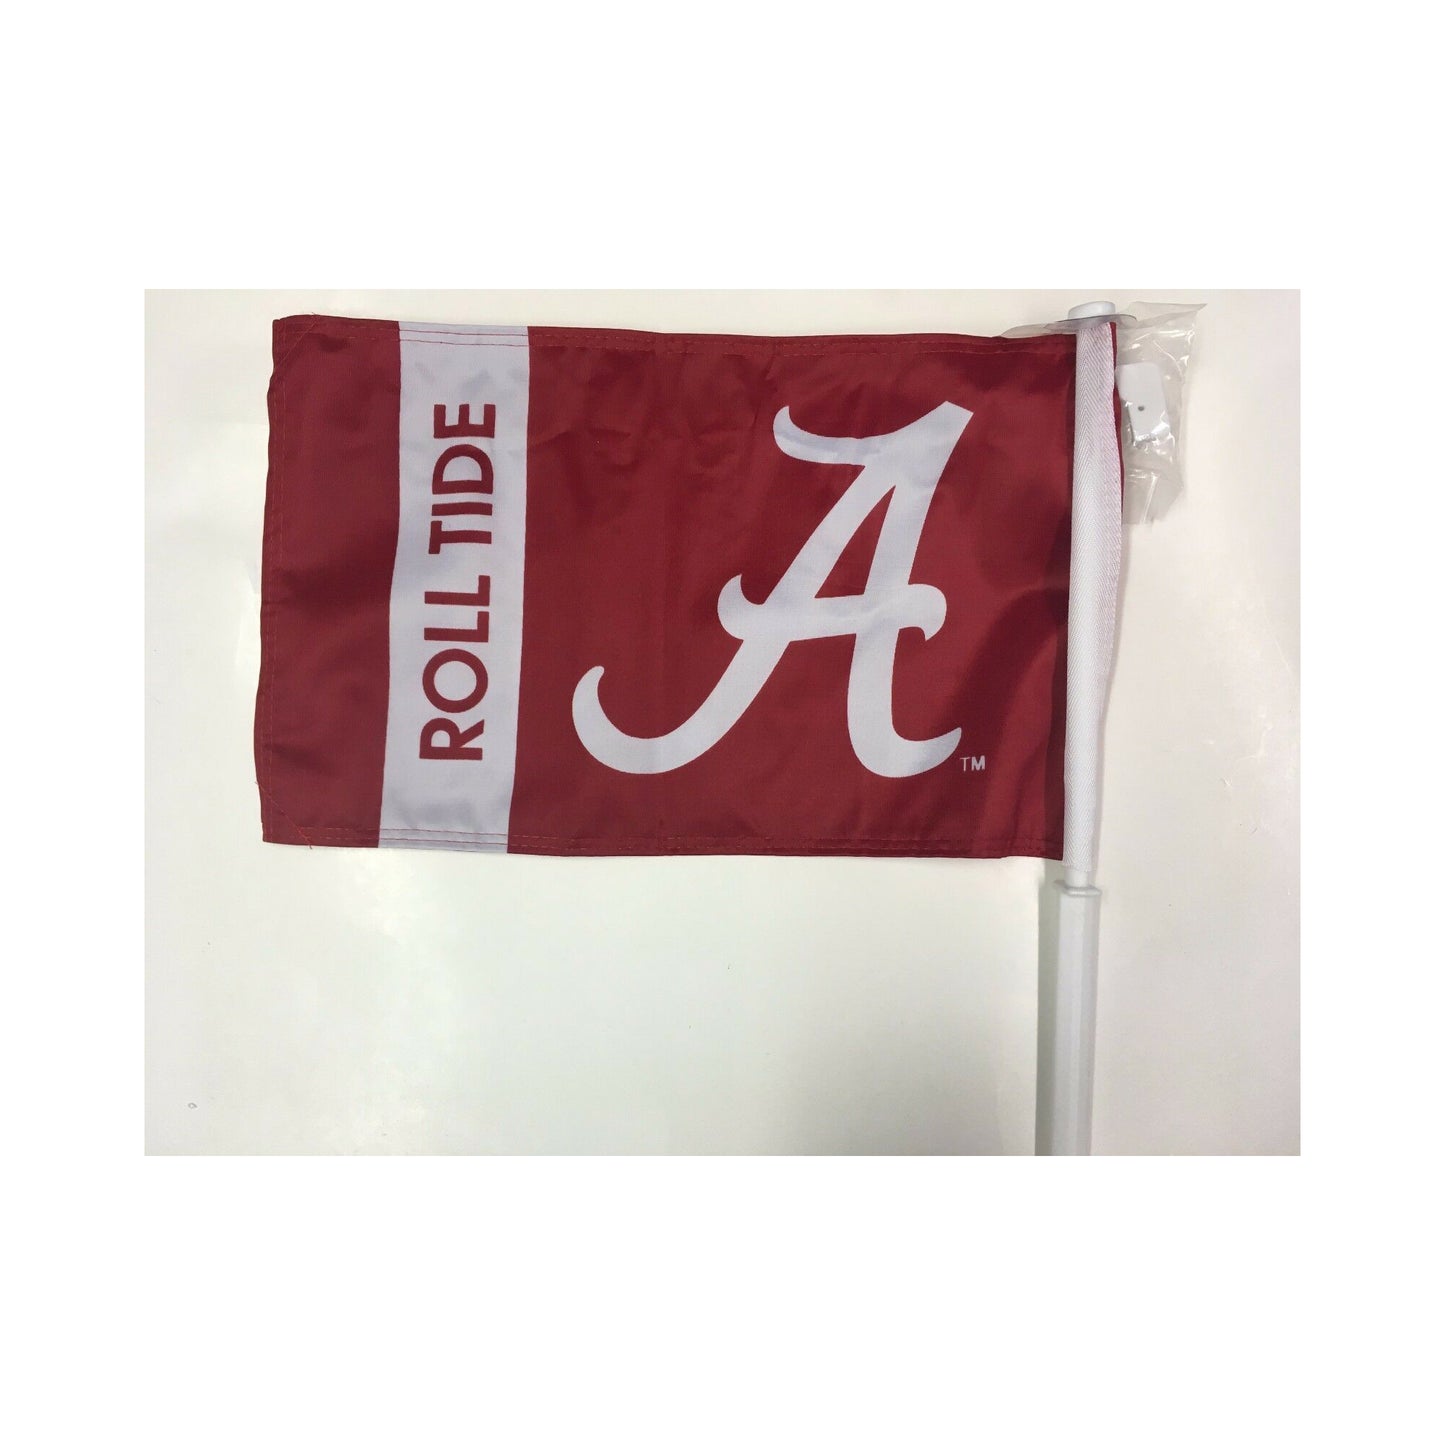 New Alabama Roll Tide Car Flag with Kit to Convert Wall Flag